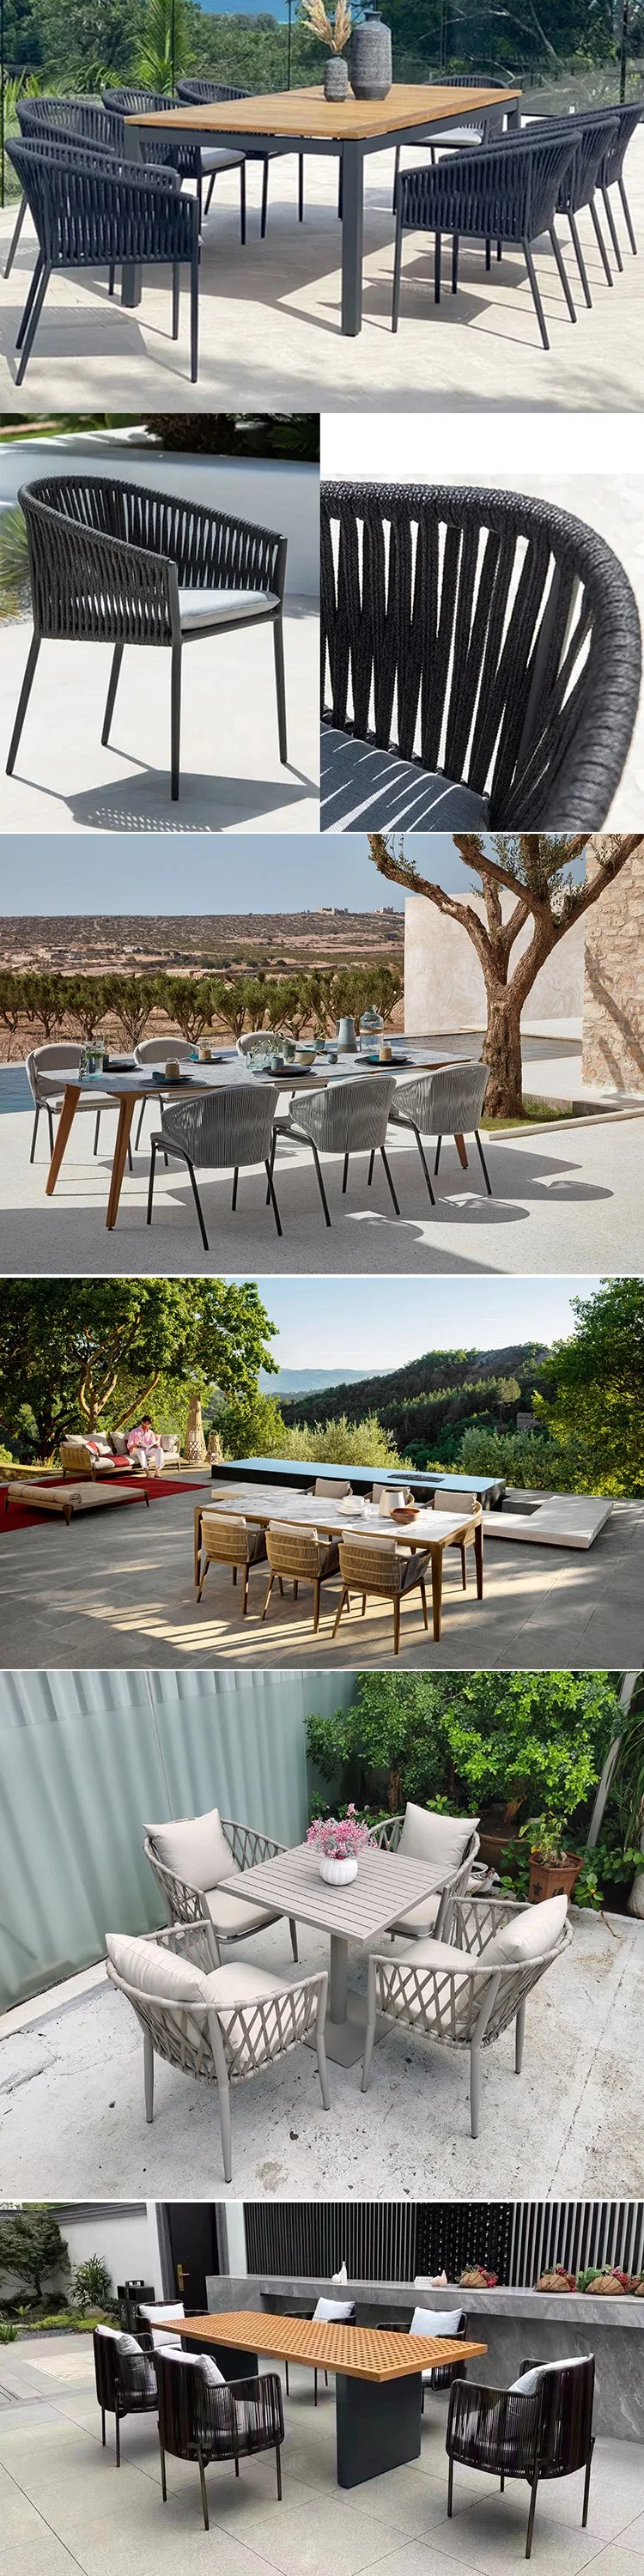 Modern Outdoor Patio Furniture Cast Aluminum Garden Chair and Long Extendable Table Dining Set